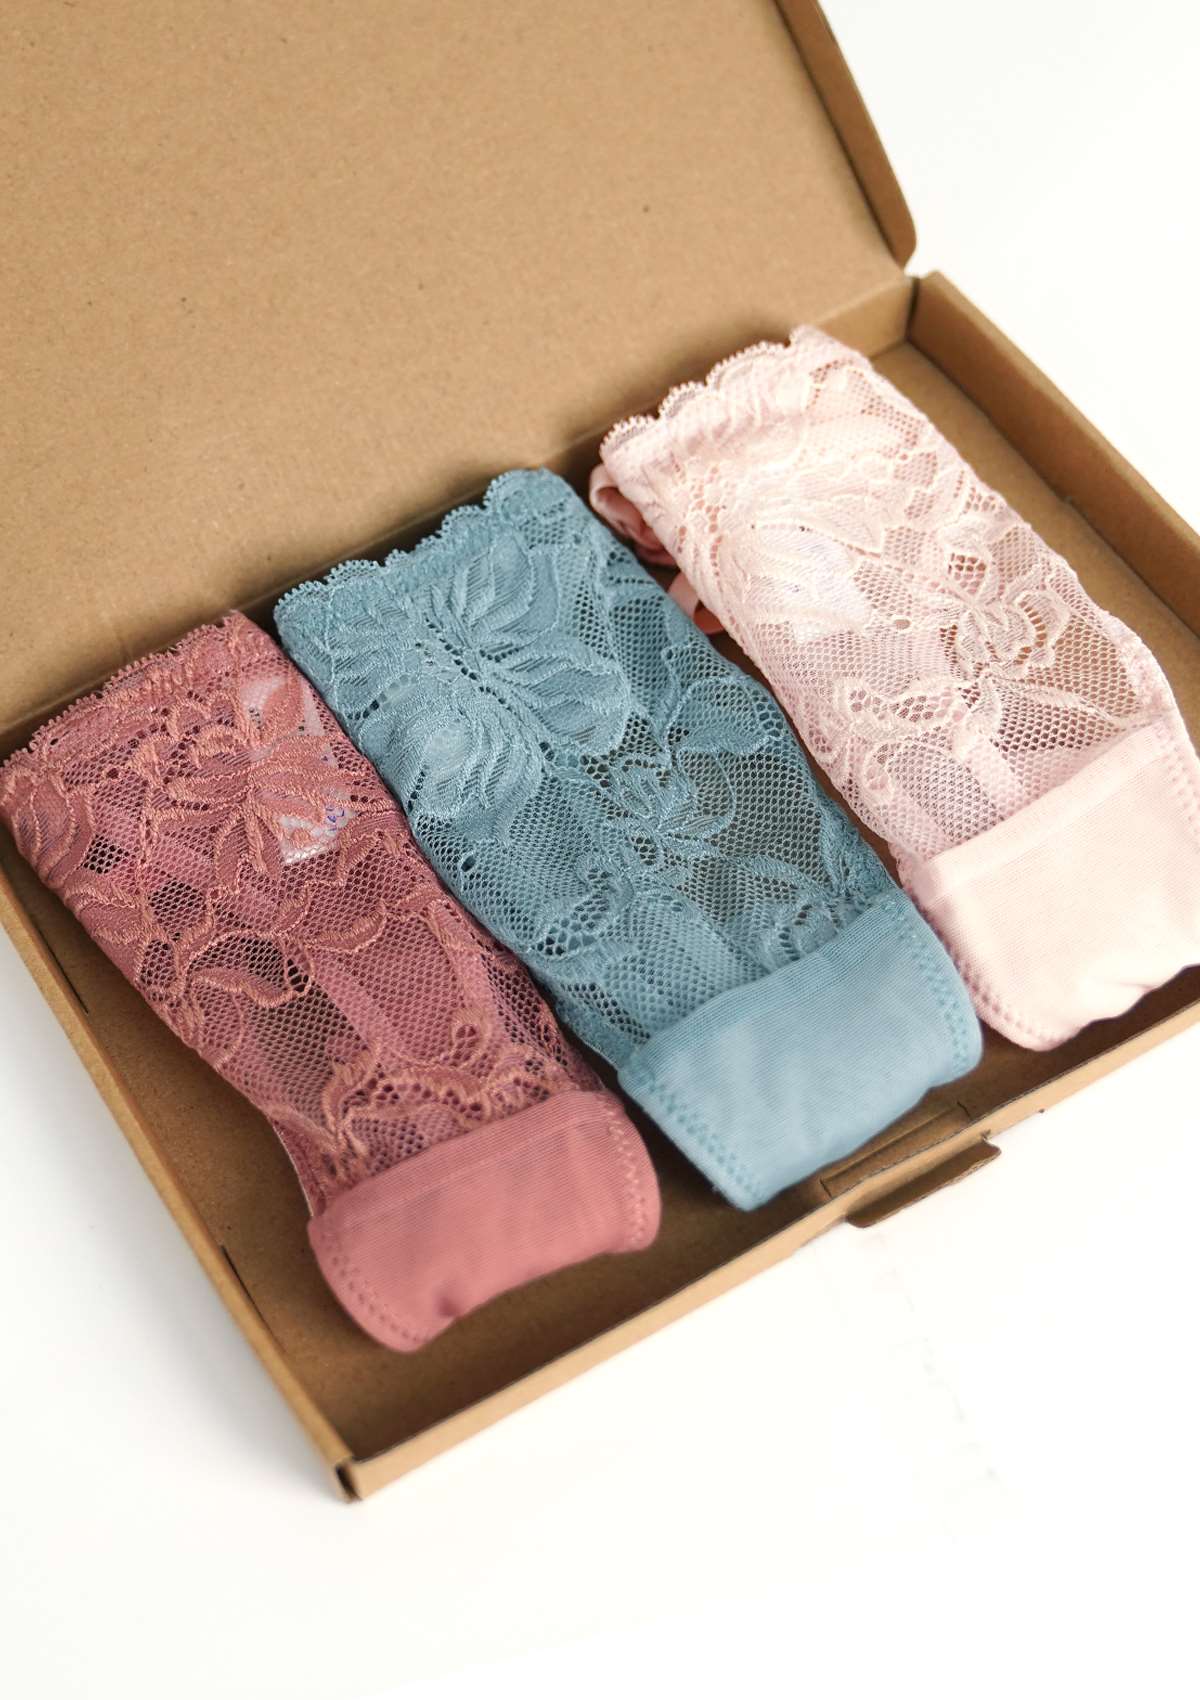 HSIA Pretty In Petals: 3-Pack Of Sexy Floral Chic Lace String Thongs - L / Light Coral+Dusty Peach+Pewter Blue